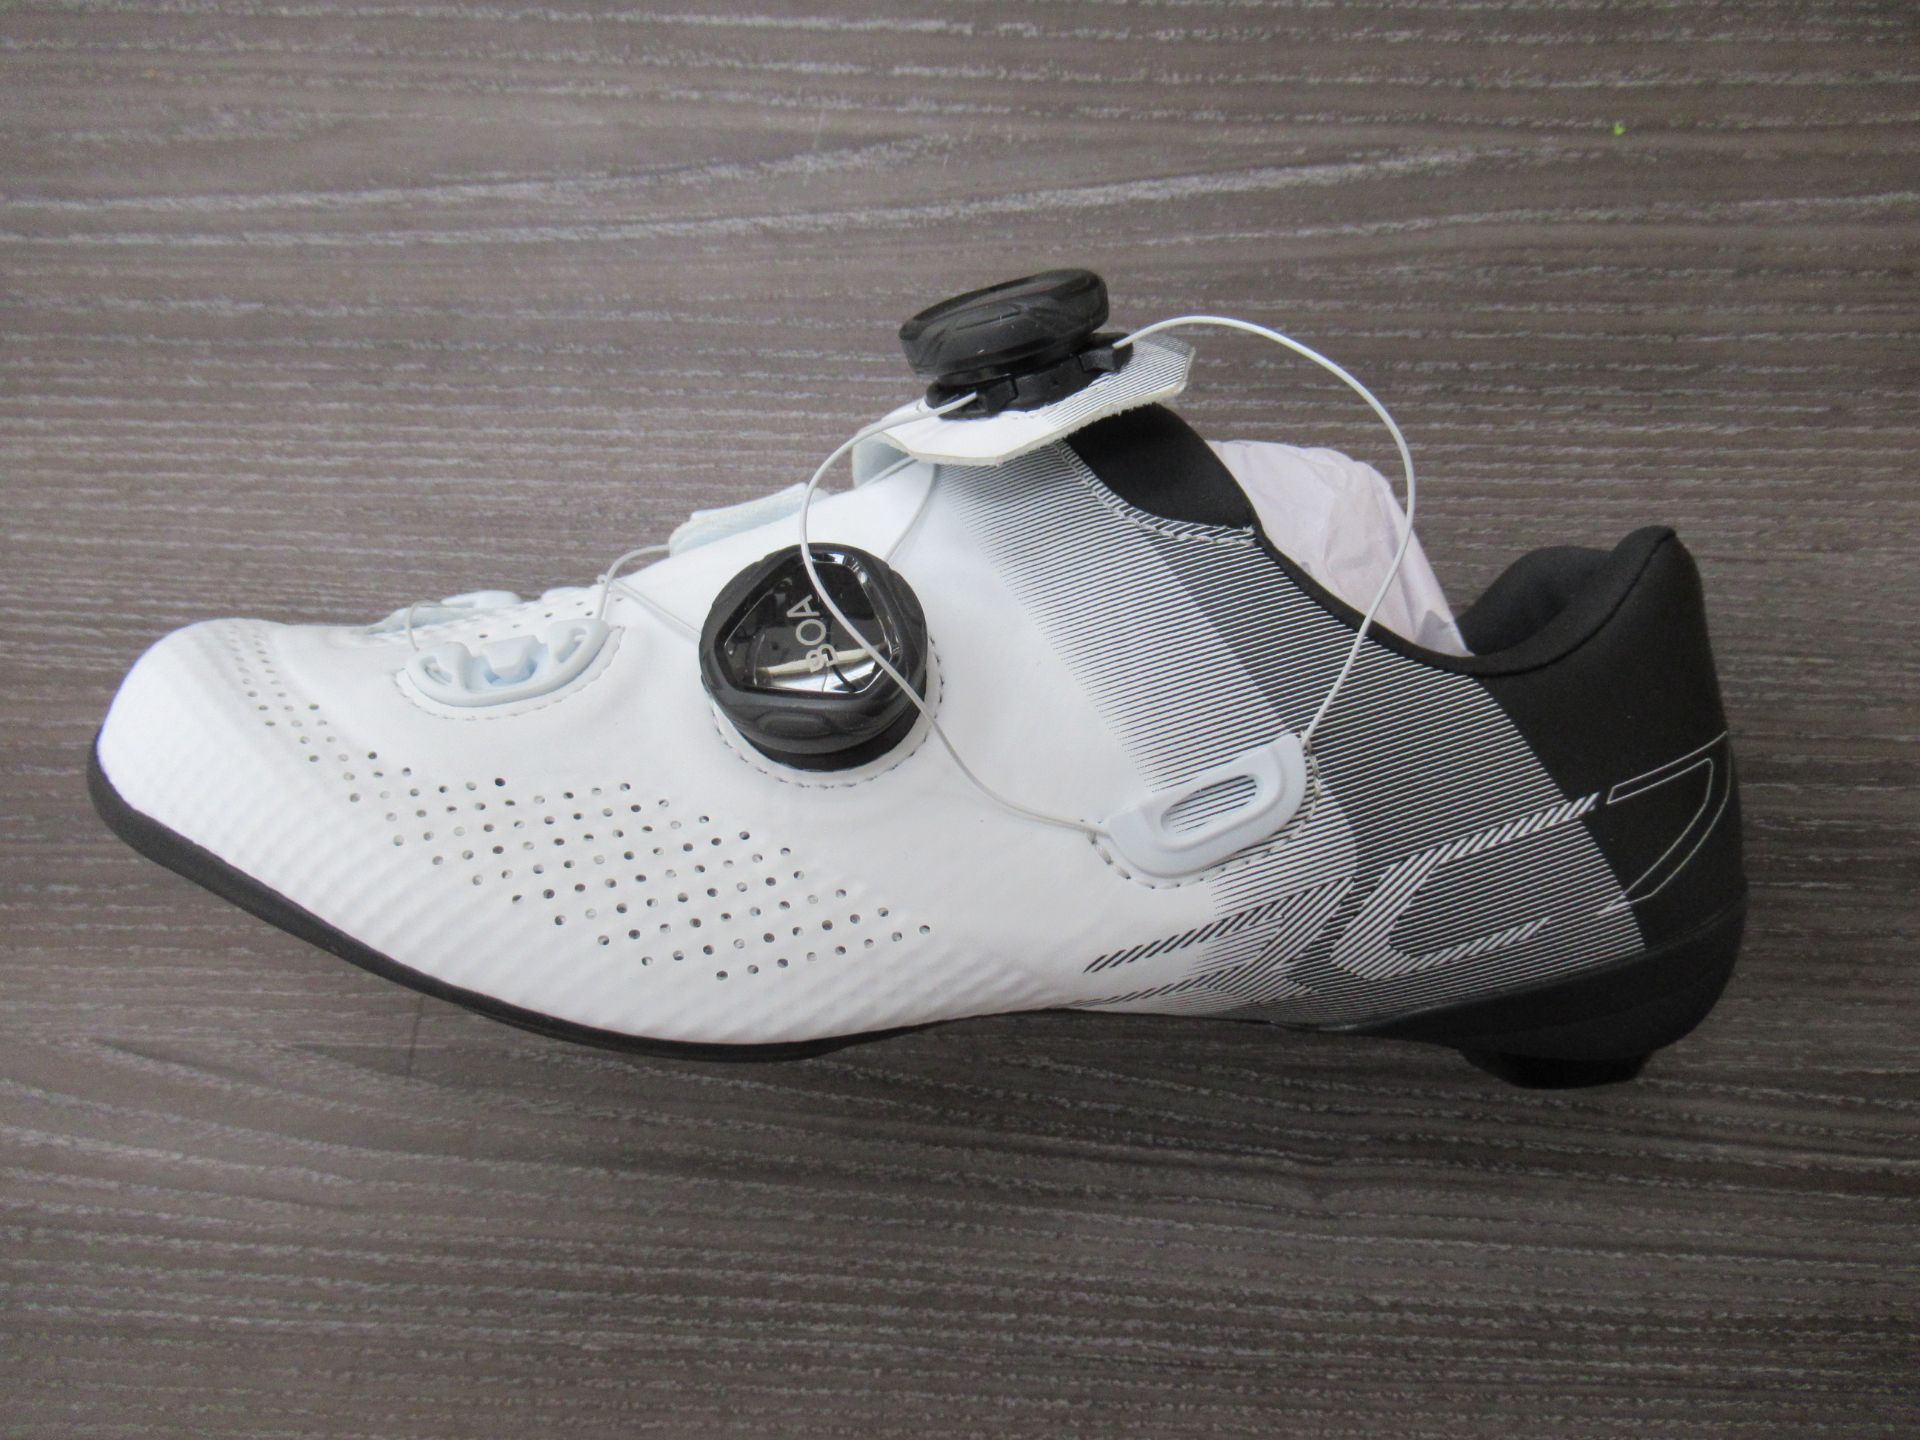 2 x Pairs of Shimano RC7 cycling shoes - 1 x white boxed EU size 38 and 1 x black boxed EU size 40 ( - Image 7 of 7